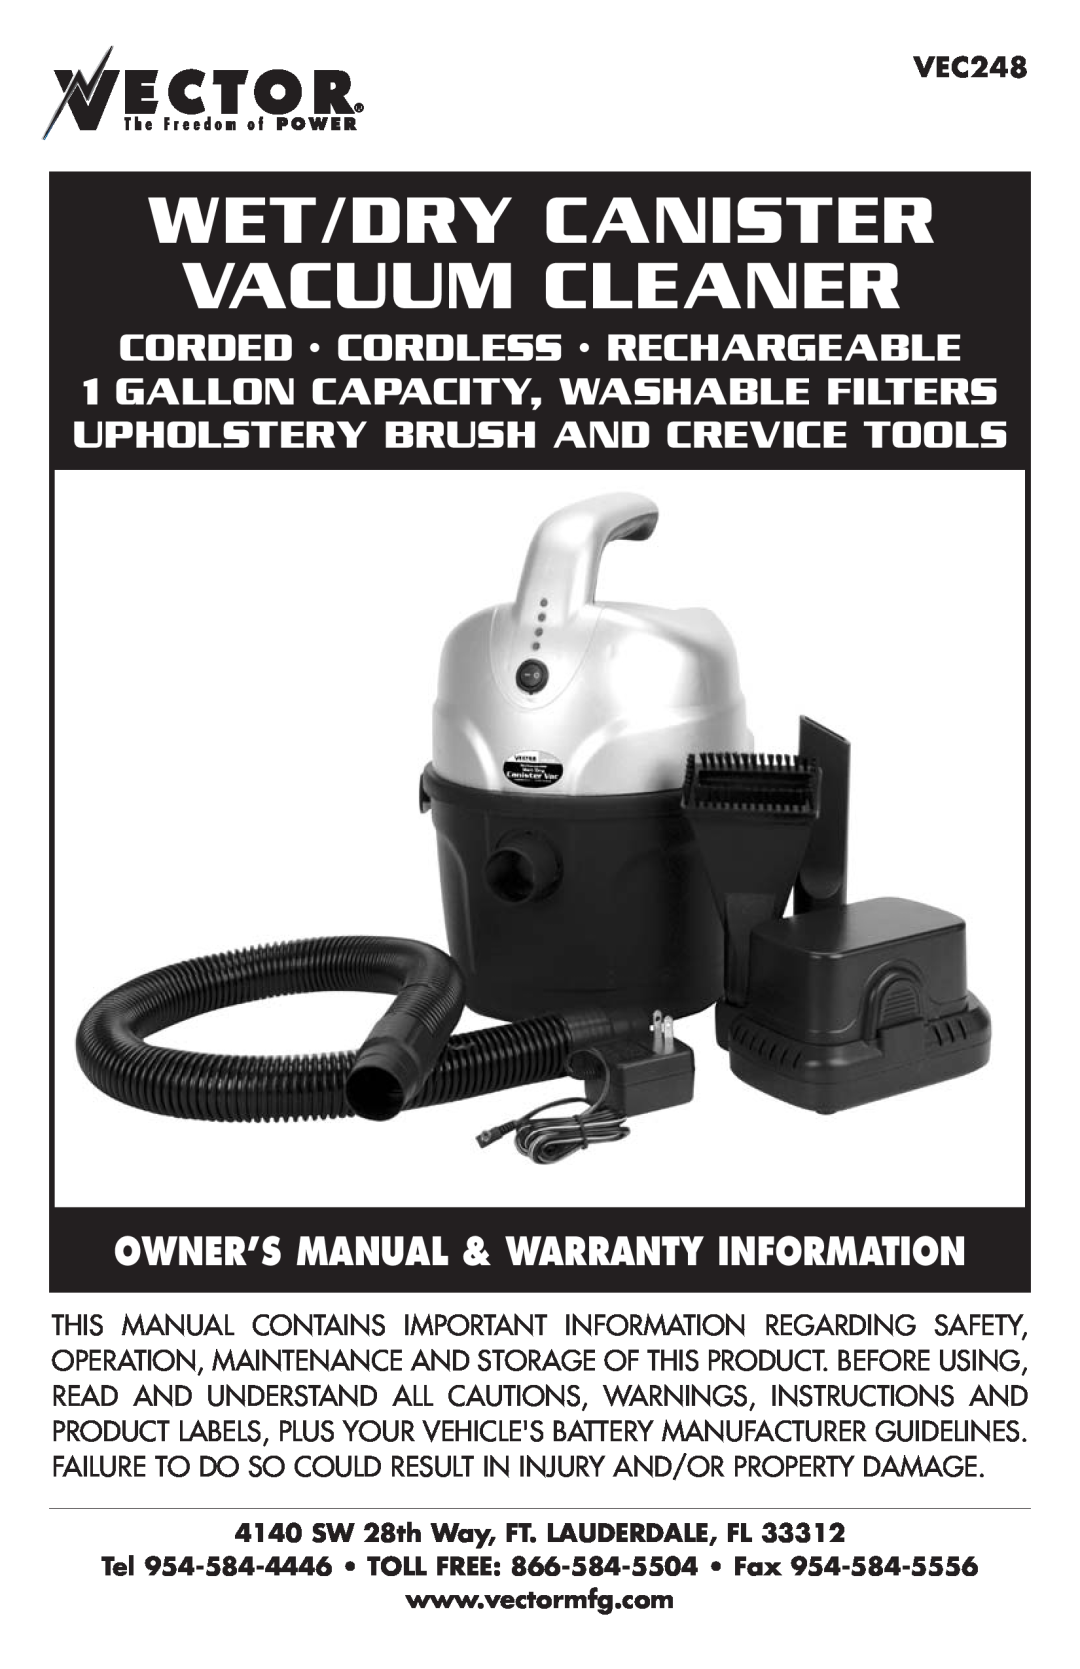 Vector VEC248 owner manual 4140 SW 28th Way, FT. LAUDERDALE, FL, Tel 954-584-4446 TOLL FREE 866-584-5504 Fax 